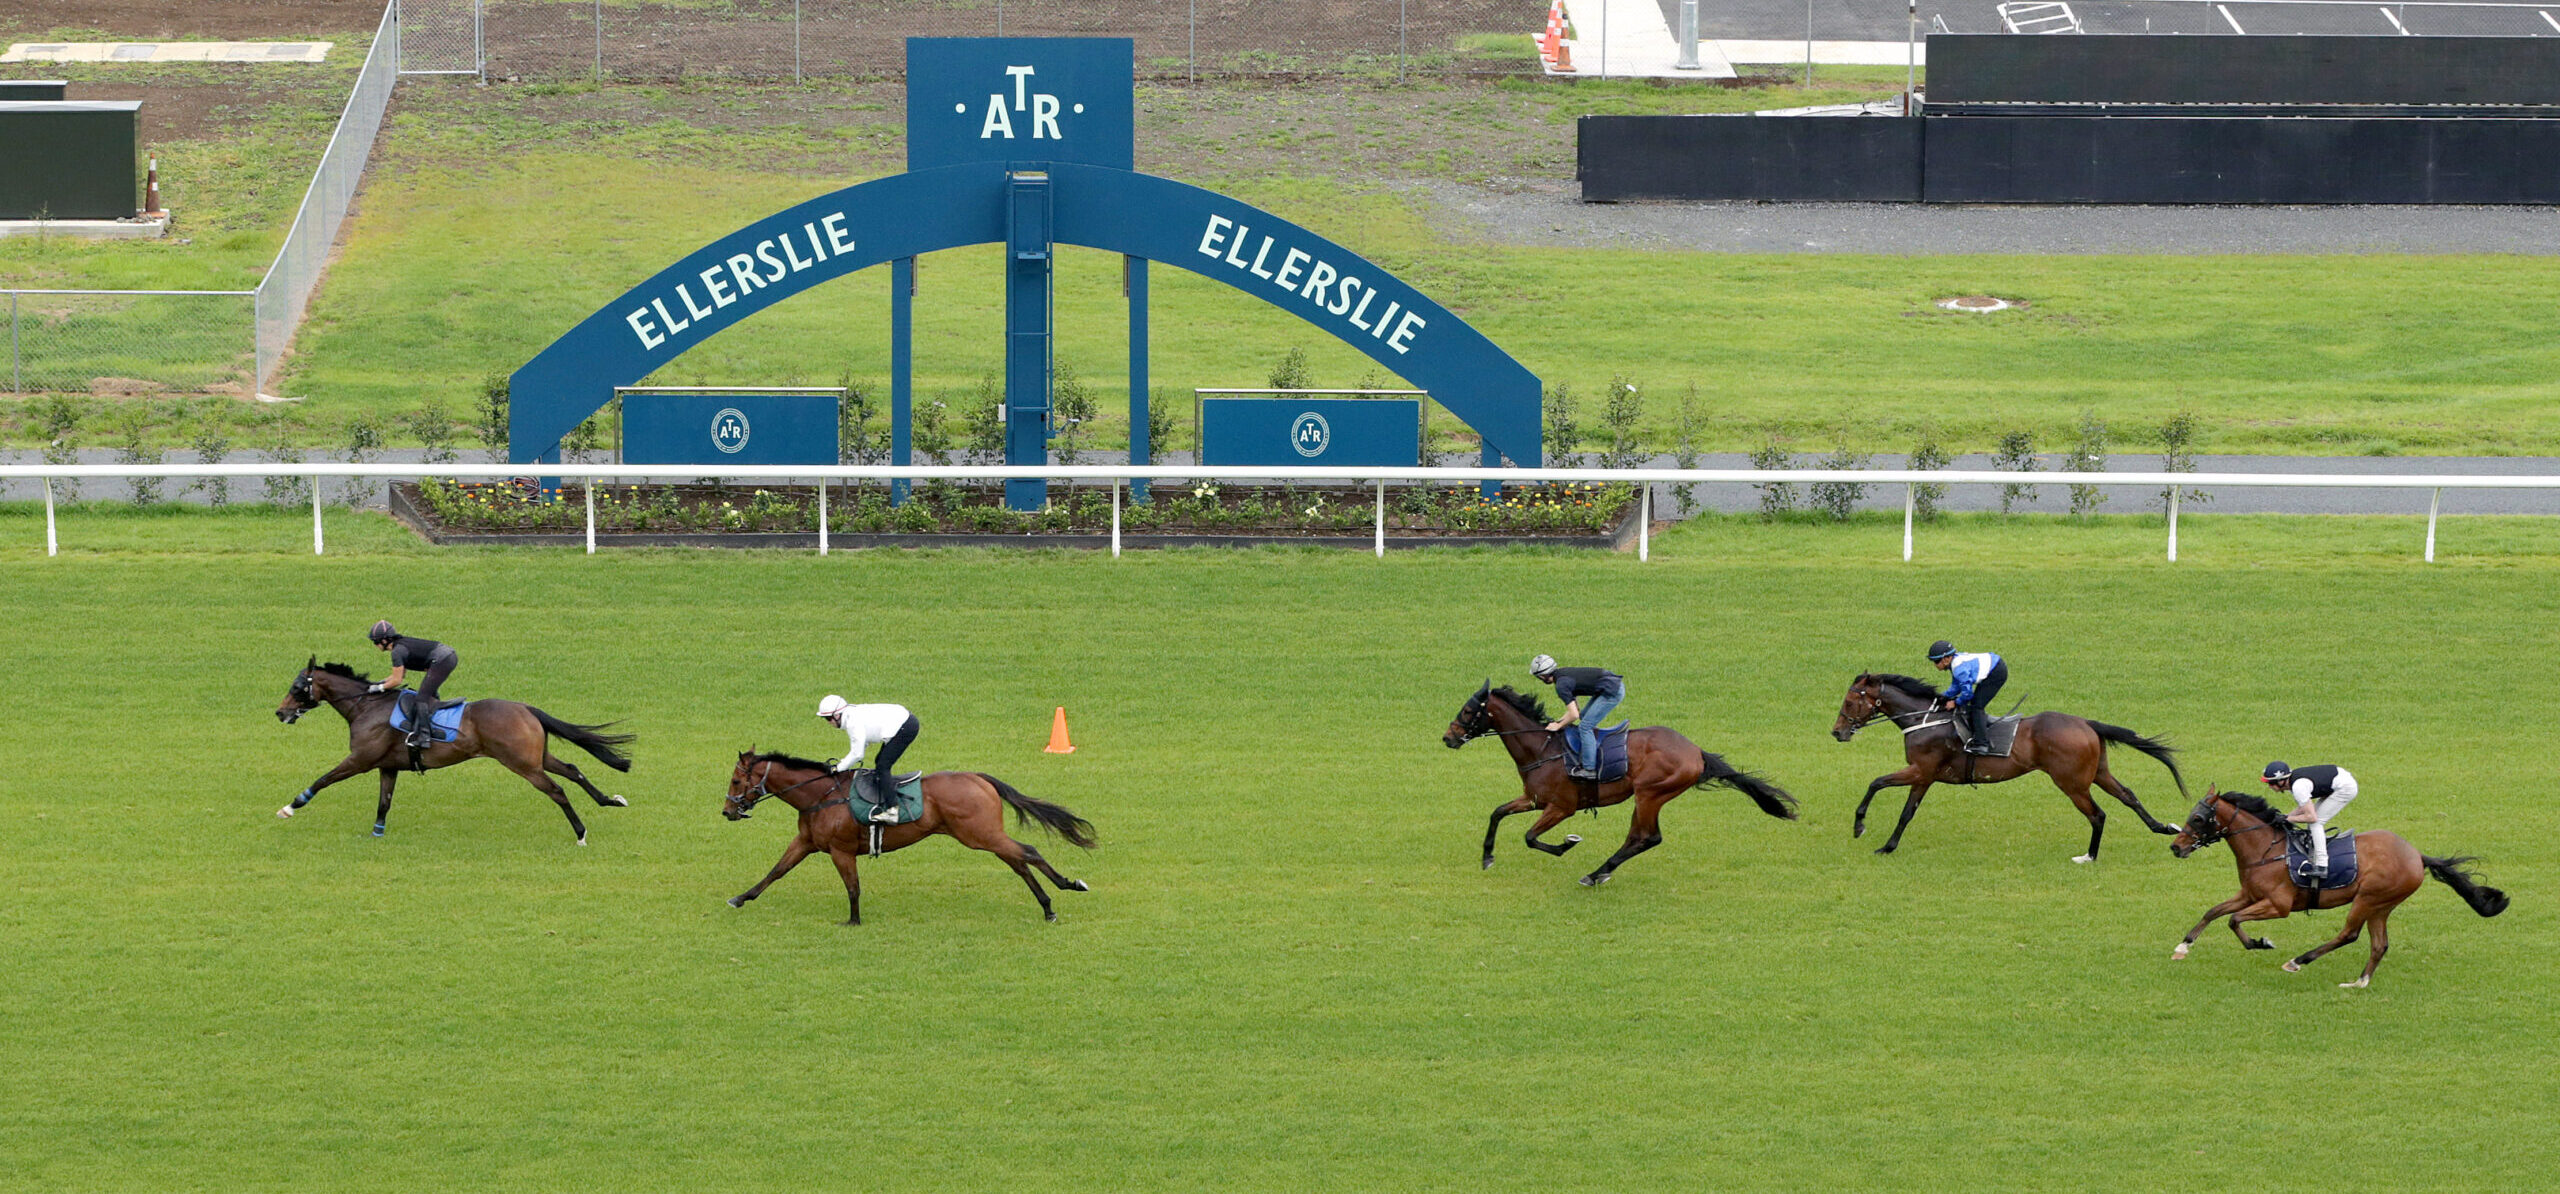 MEDIA RELEASE | Phase three of Ellerslie’s return to racing plan completed successfully by Auckland Thoroughbred Racing